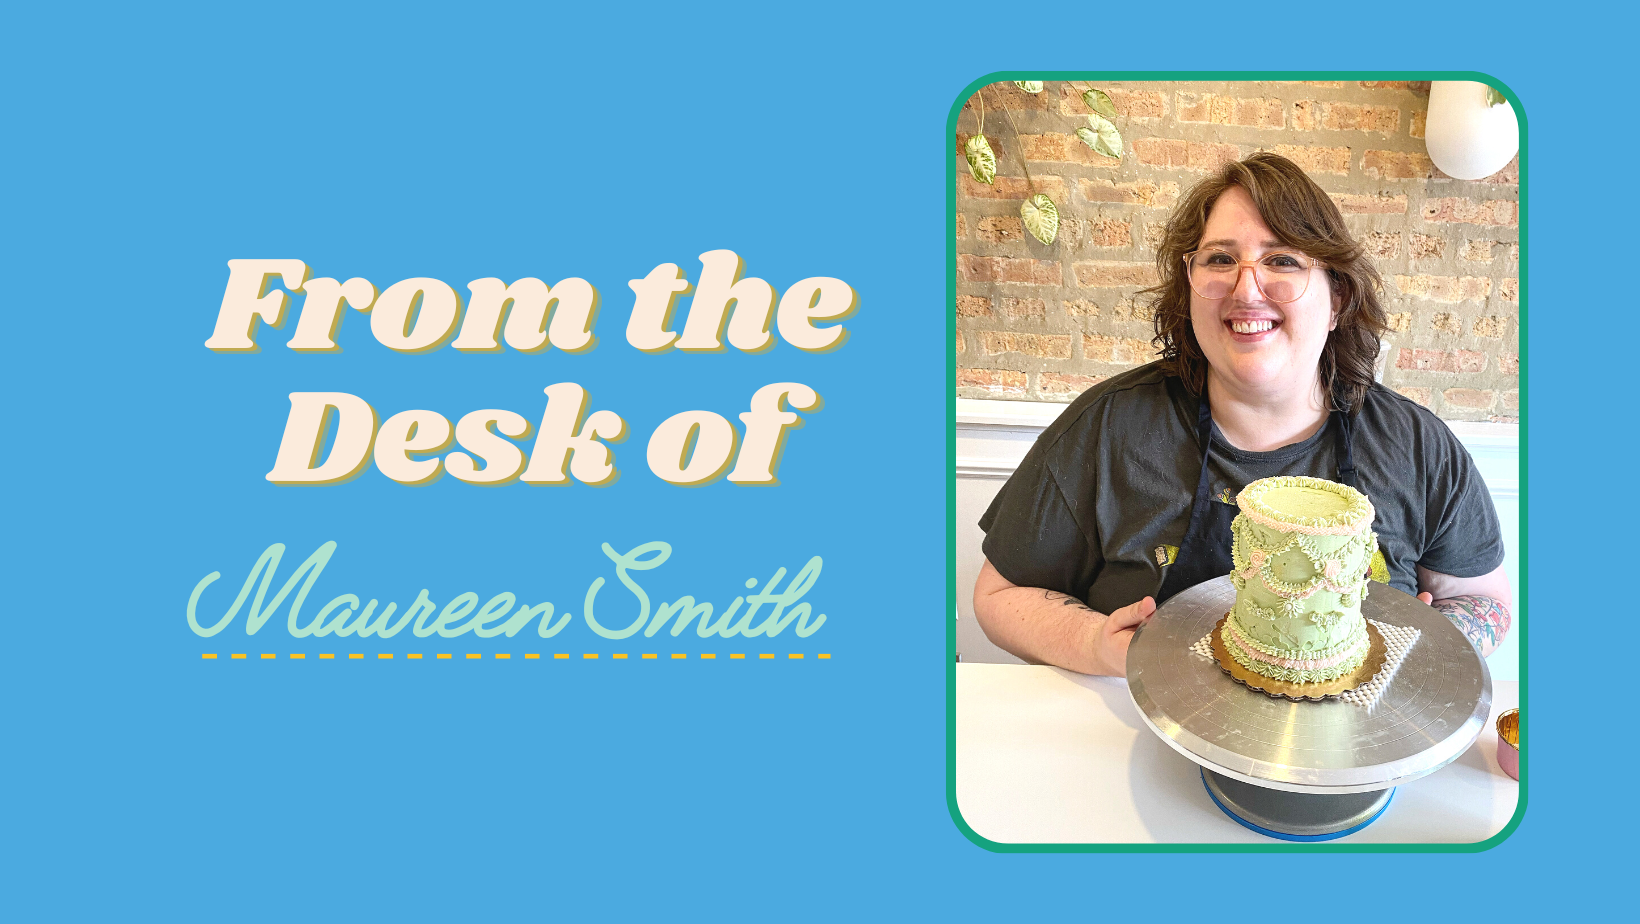 Picture of woman with brown hair and glasses, smiling, while holding a cake and text saying "From the Desk of: Maureen Smith"